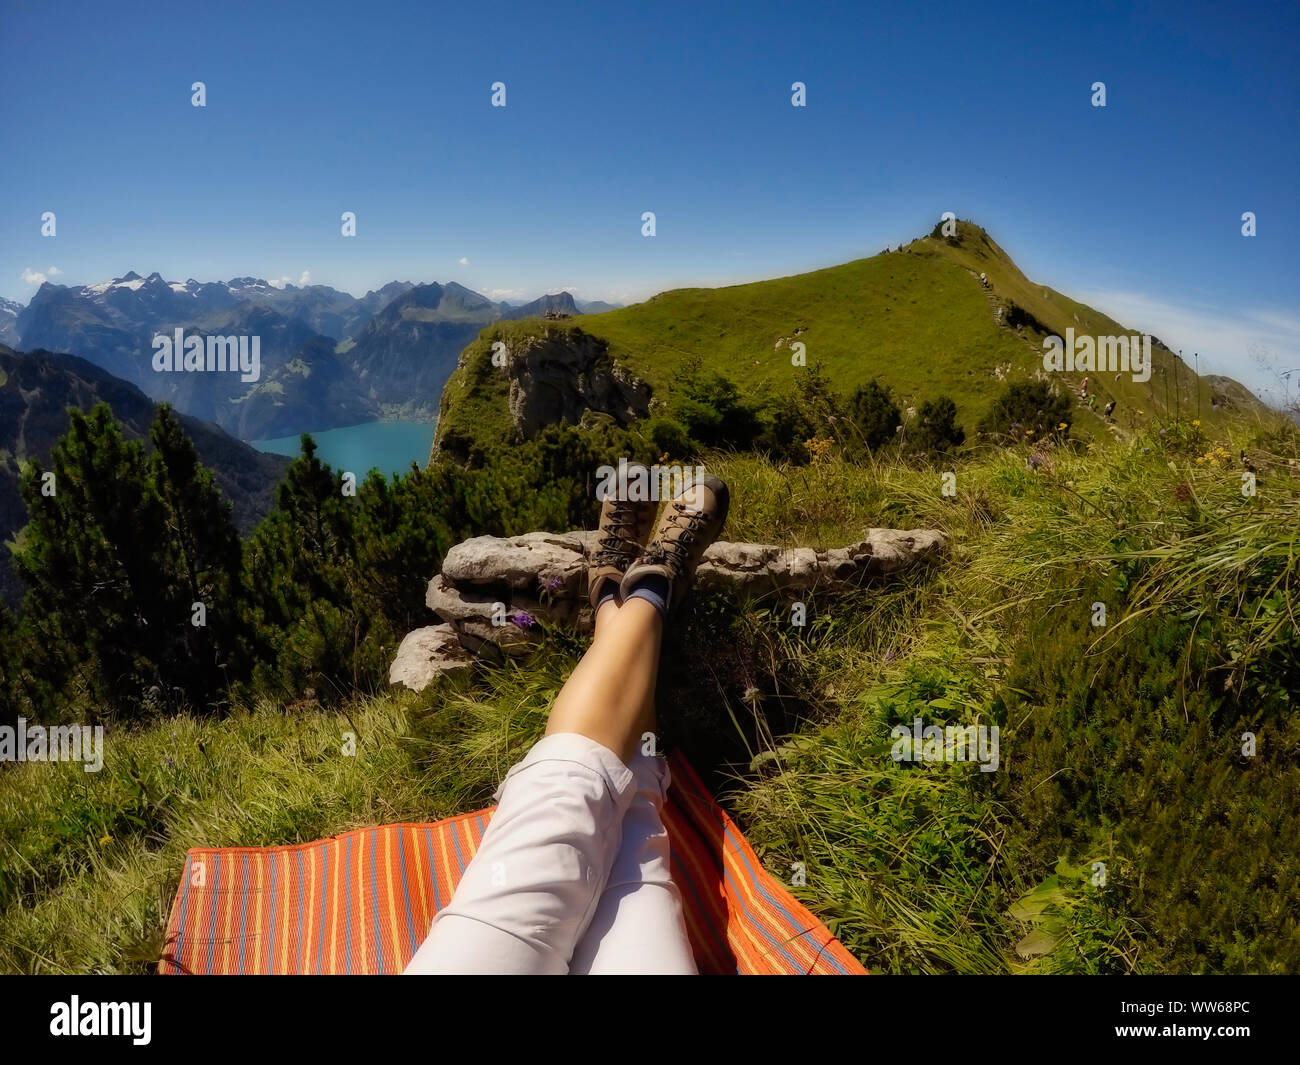 Woman's legs lying on a blanket in the mountains, Switzerland Stock Photo